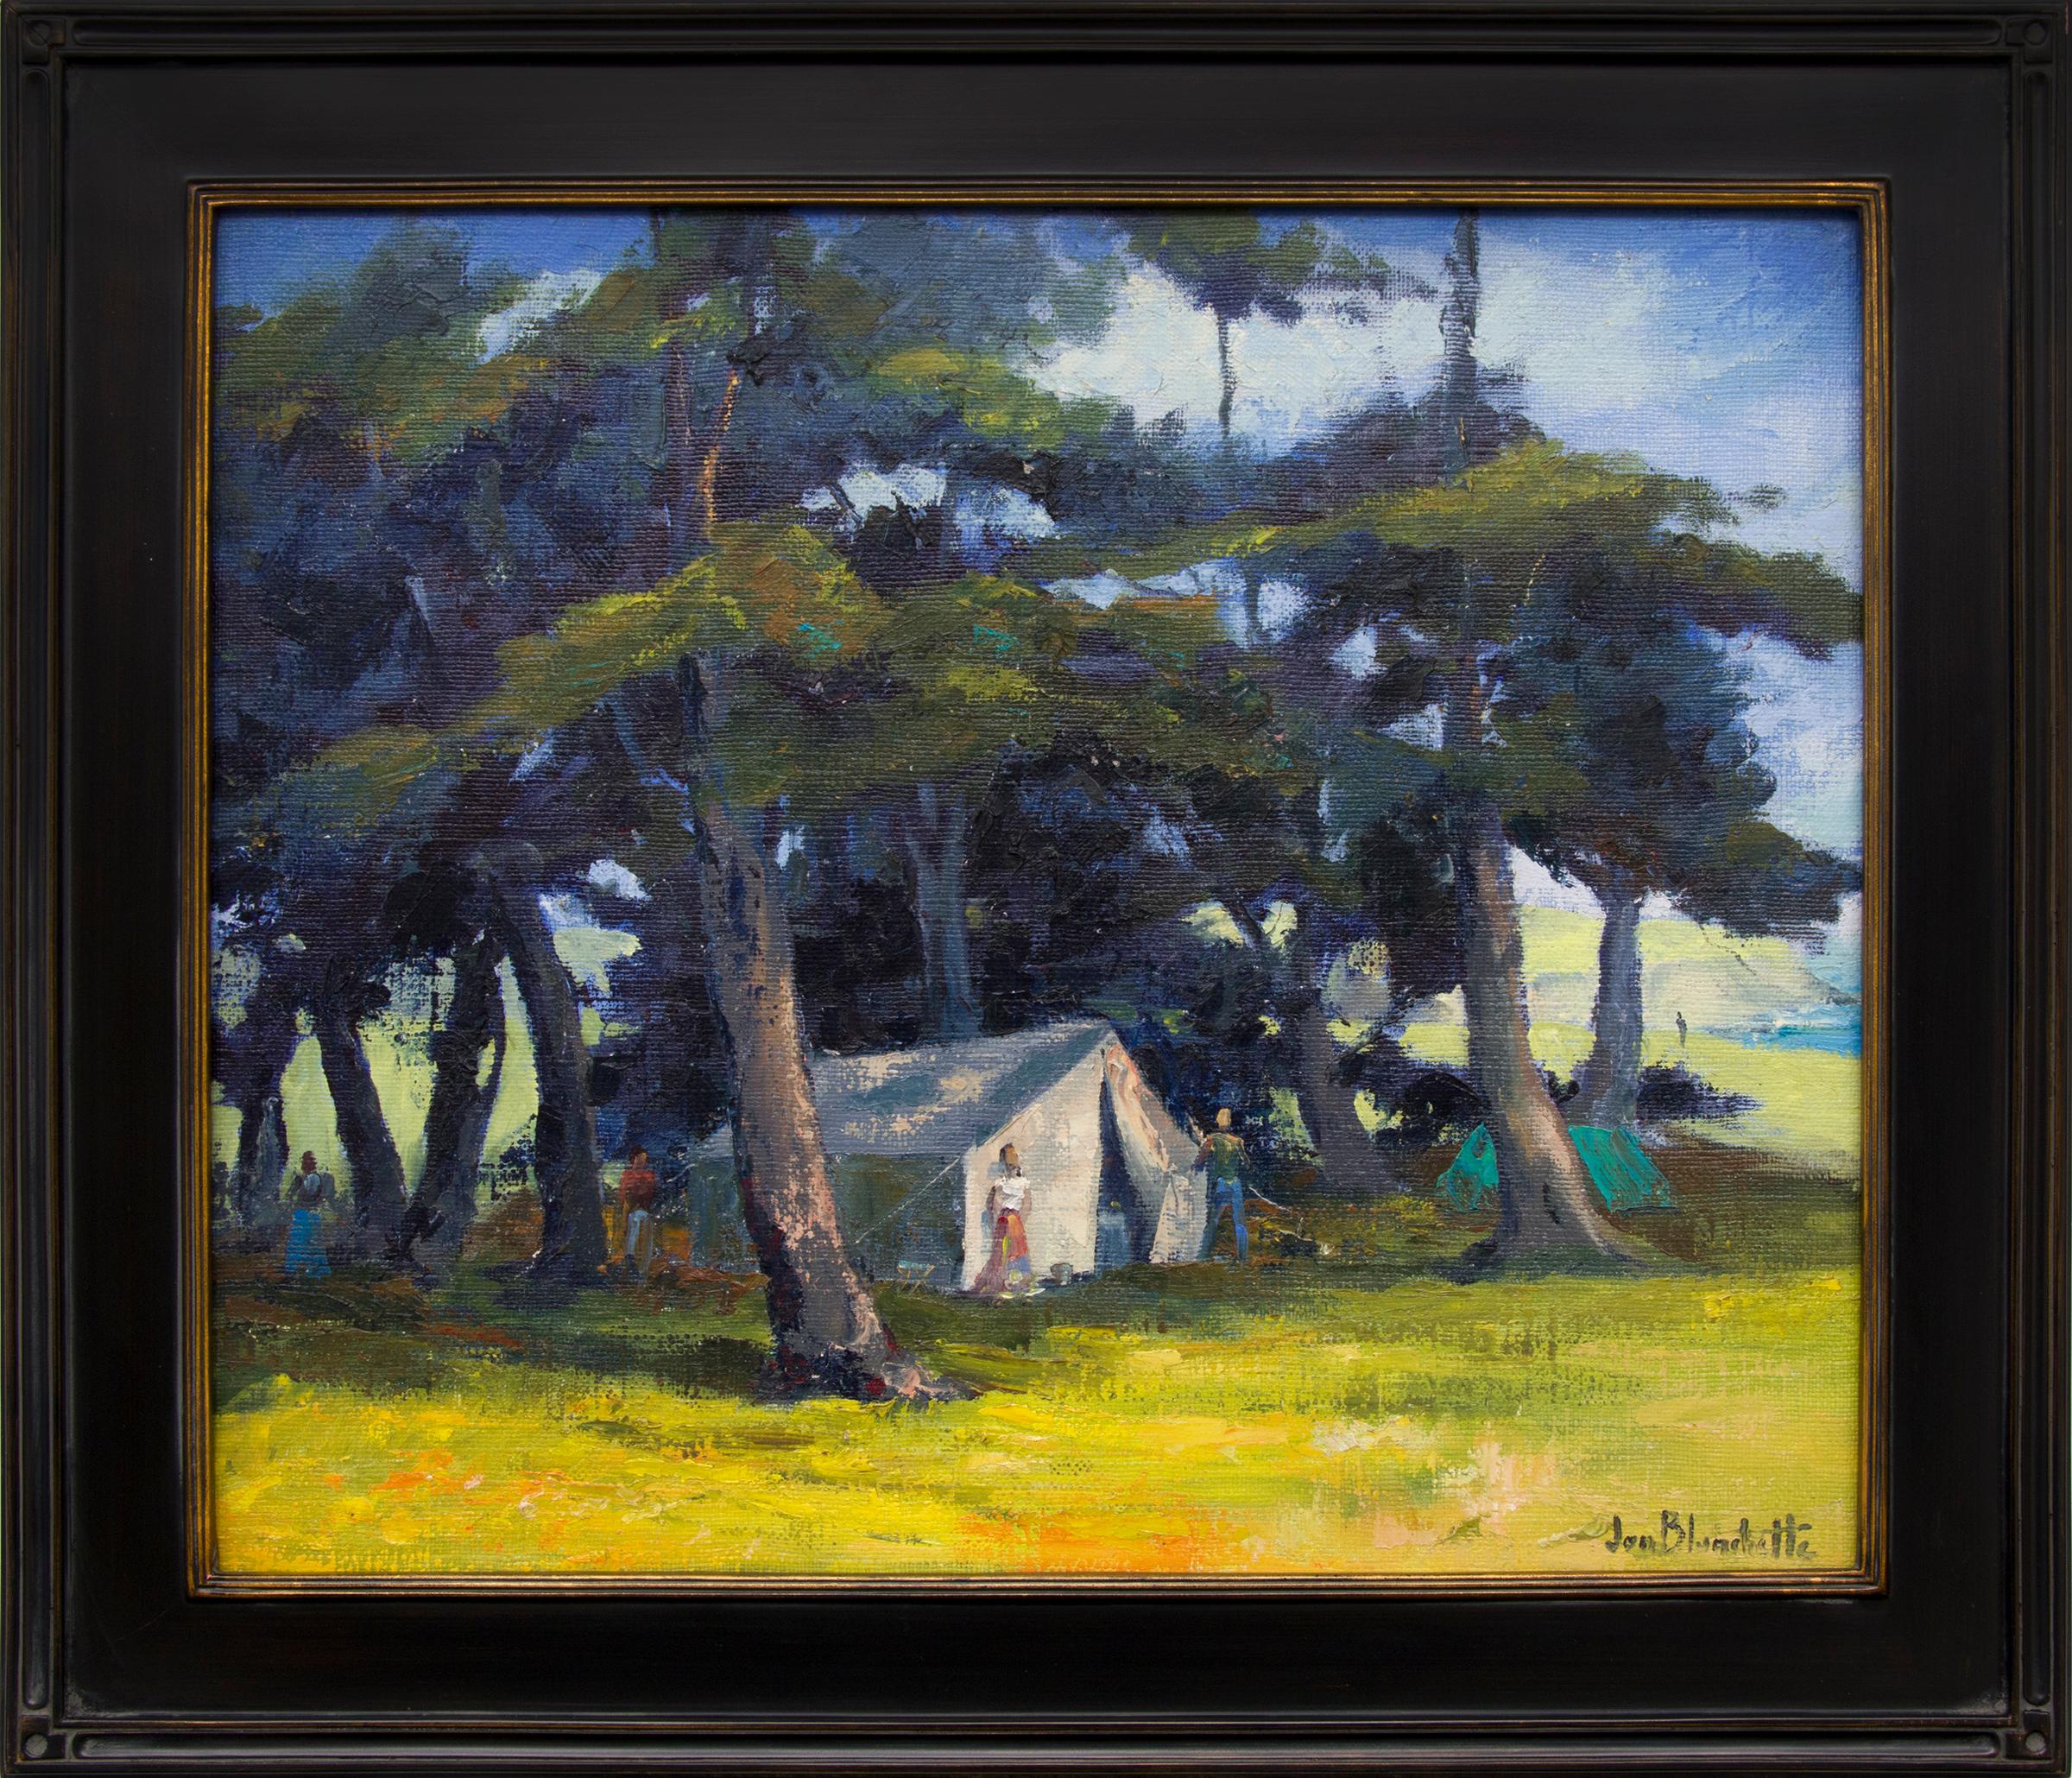 Mendocino Hippies, Framed 1960s Northern California Landscape Oil Painting 